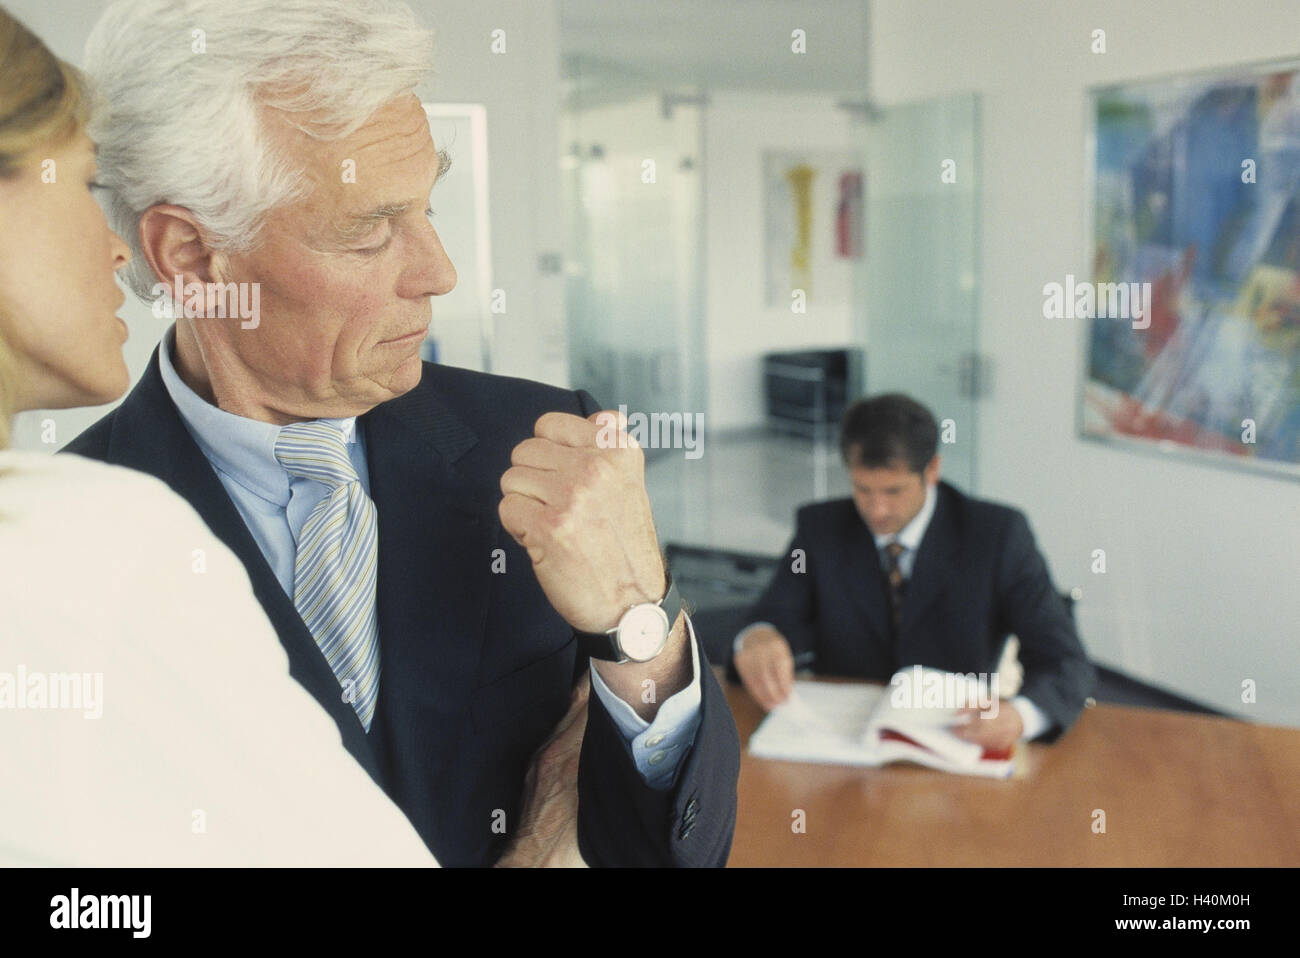 Office, employee, harassment, blaspheme, denounce, business, work, occupation, men, man, woman, office workers, clerks, colleagues, unfair, uncooperatively, colleague, mock, accuse, accusation, mockery, irony, exclusion, secrecy, conflict, indiscretion Stock Photo